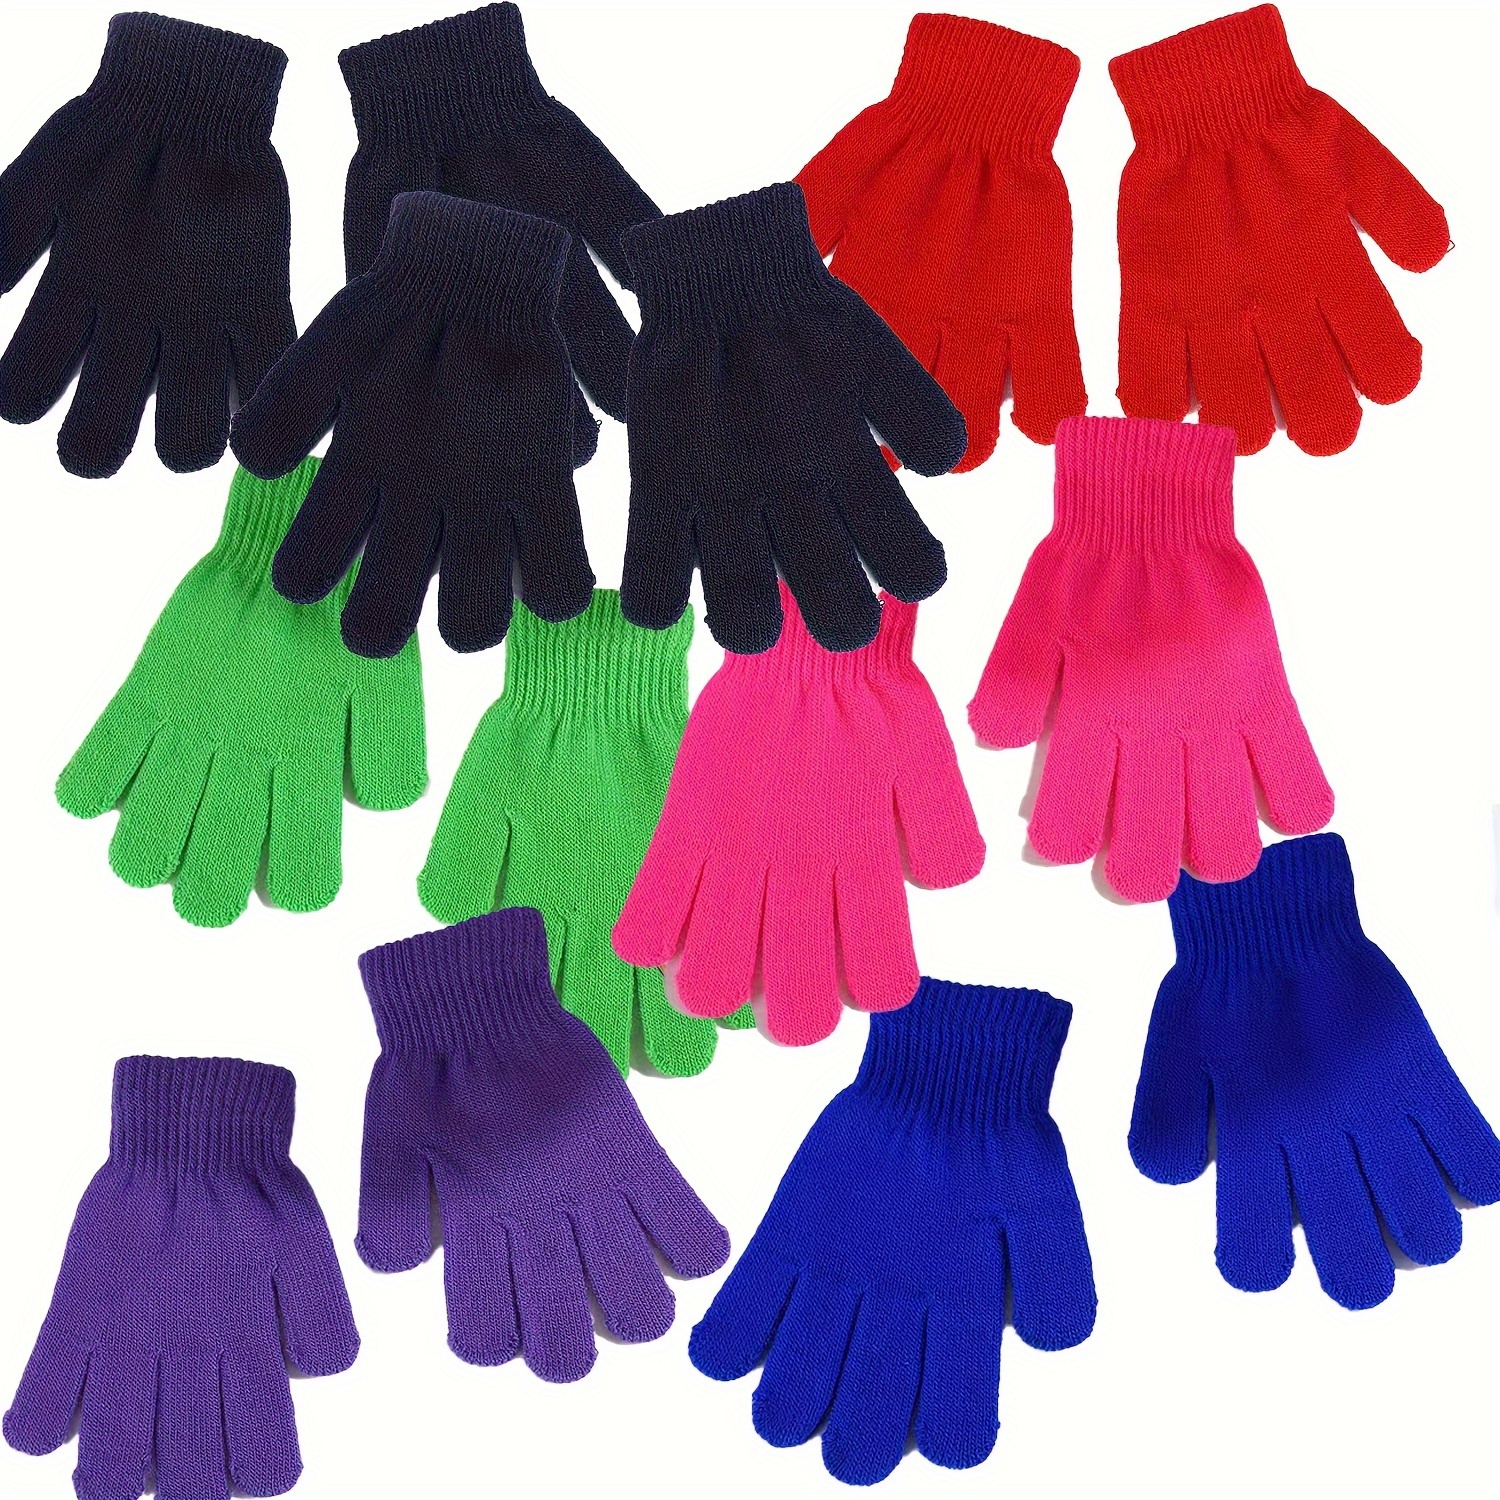 1pair Magic Gloves Kids Elastic Warm Magic Gloves Boy Or Girl Knitted Gloves  For Cycling Skiing Fishing Outdoors Christmas Gifts, Shop Now For  Limited-time Deals